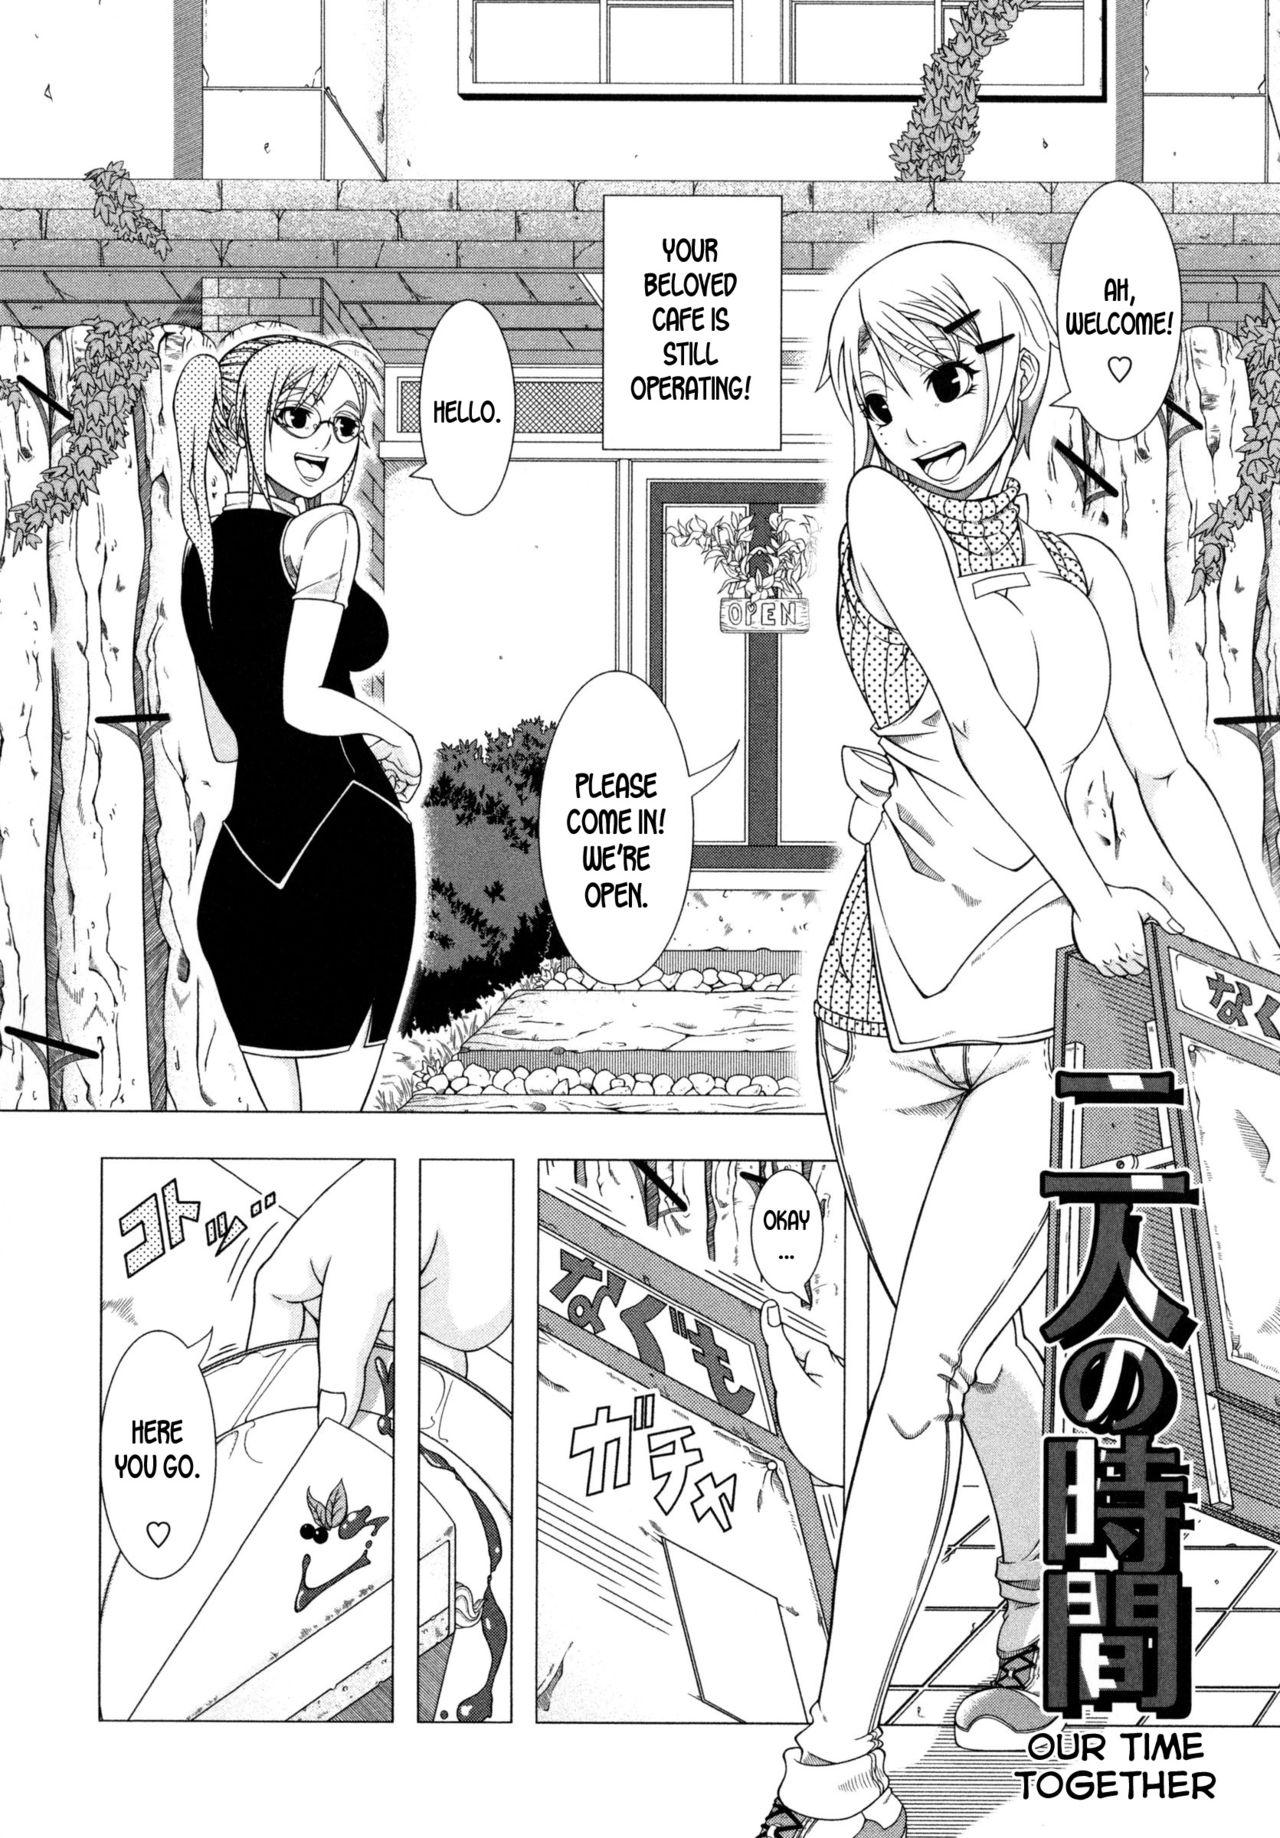 Mas Futari no Jikan | Our Time Together Yanks Featured - Page 2